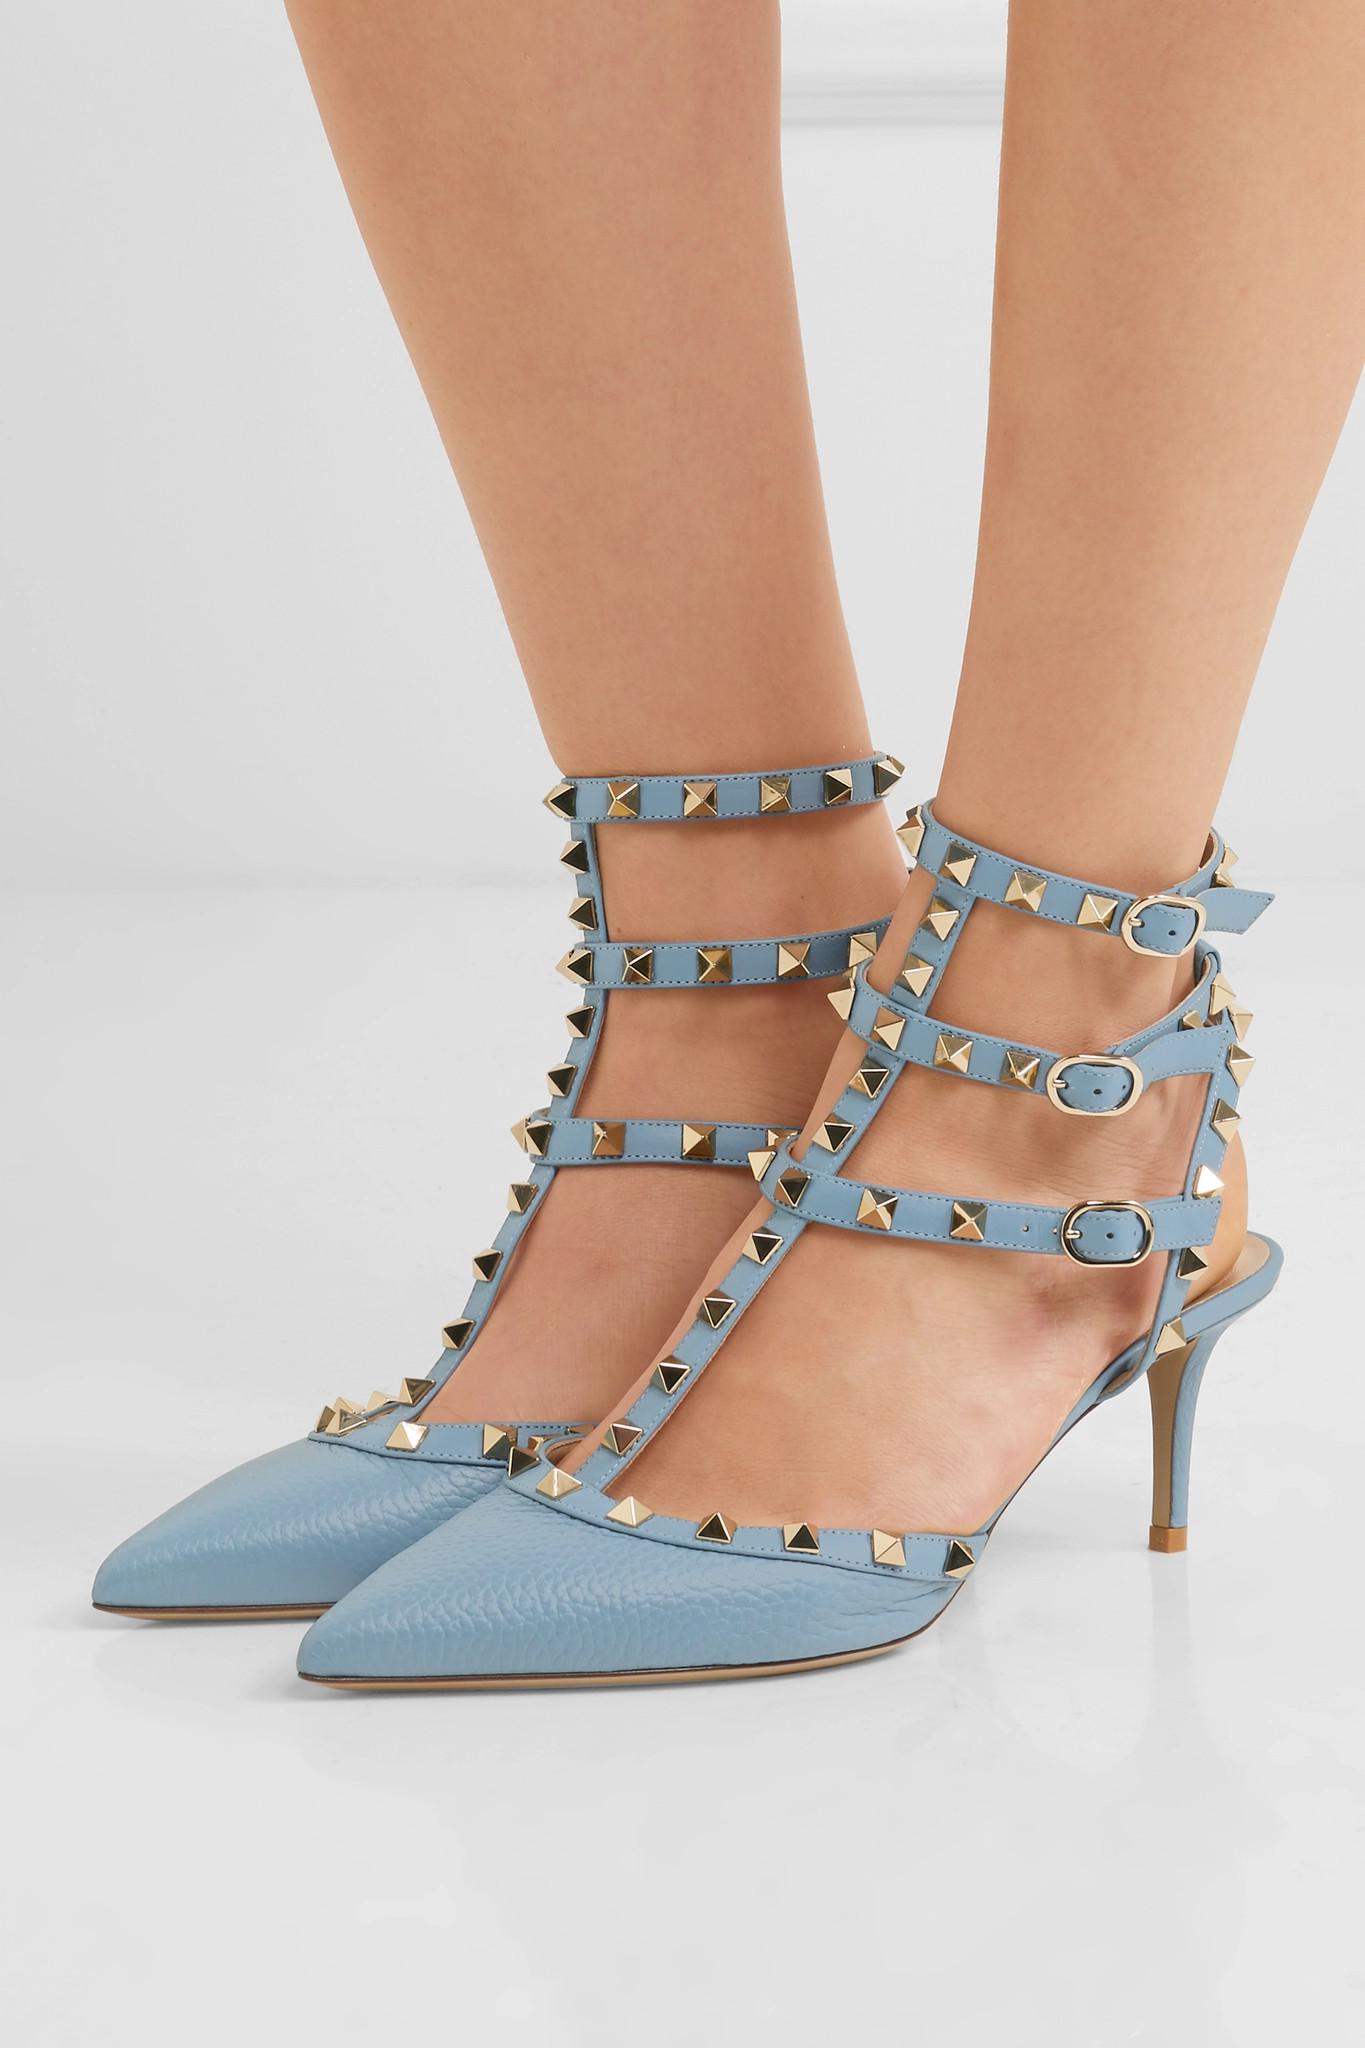 Valentino Rockstud Textured-leather Pumps in Blue - Lyst